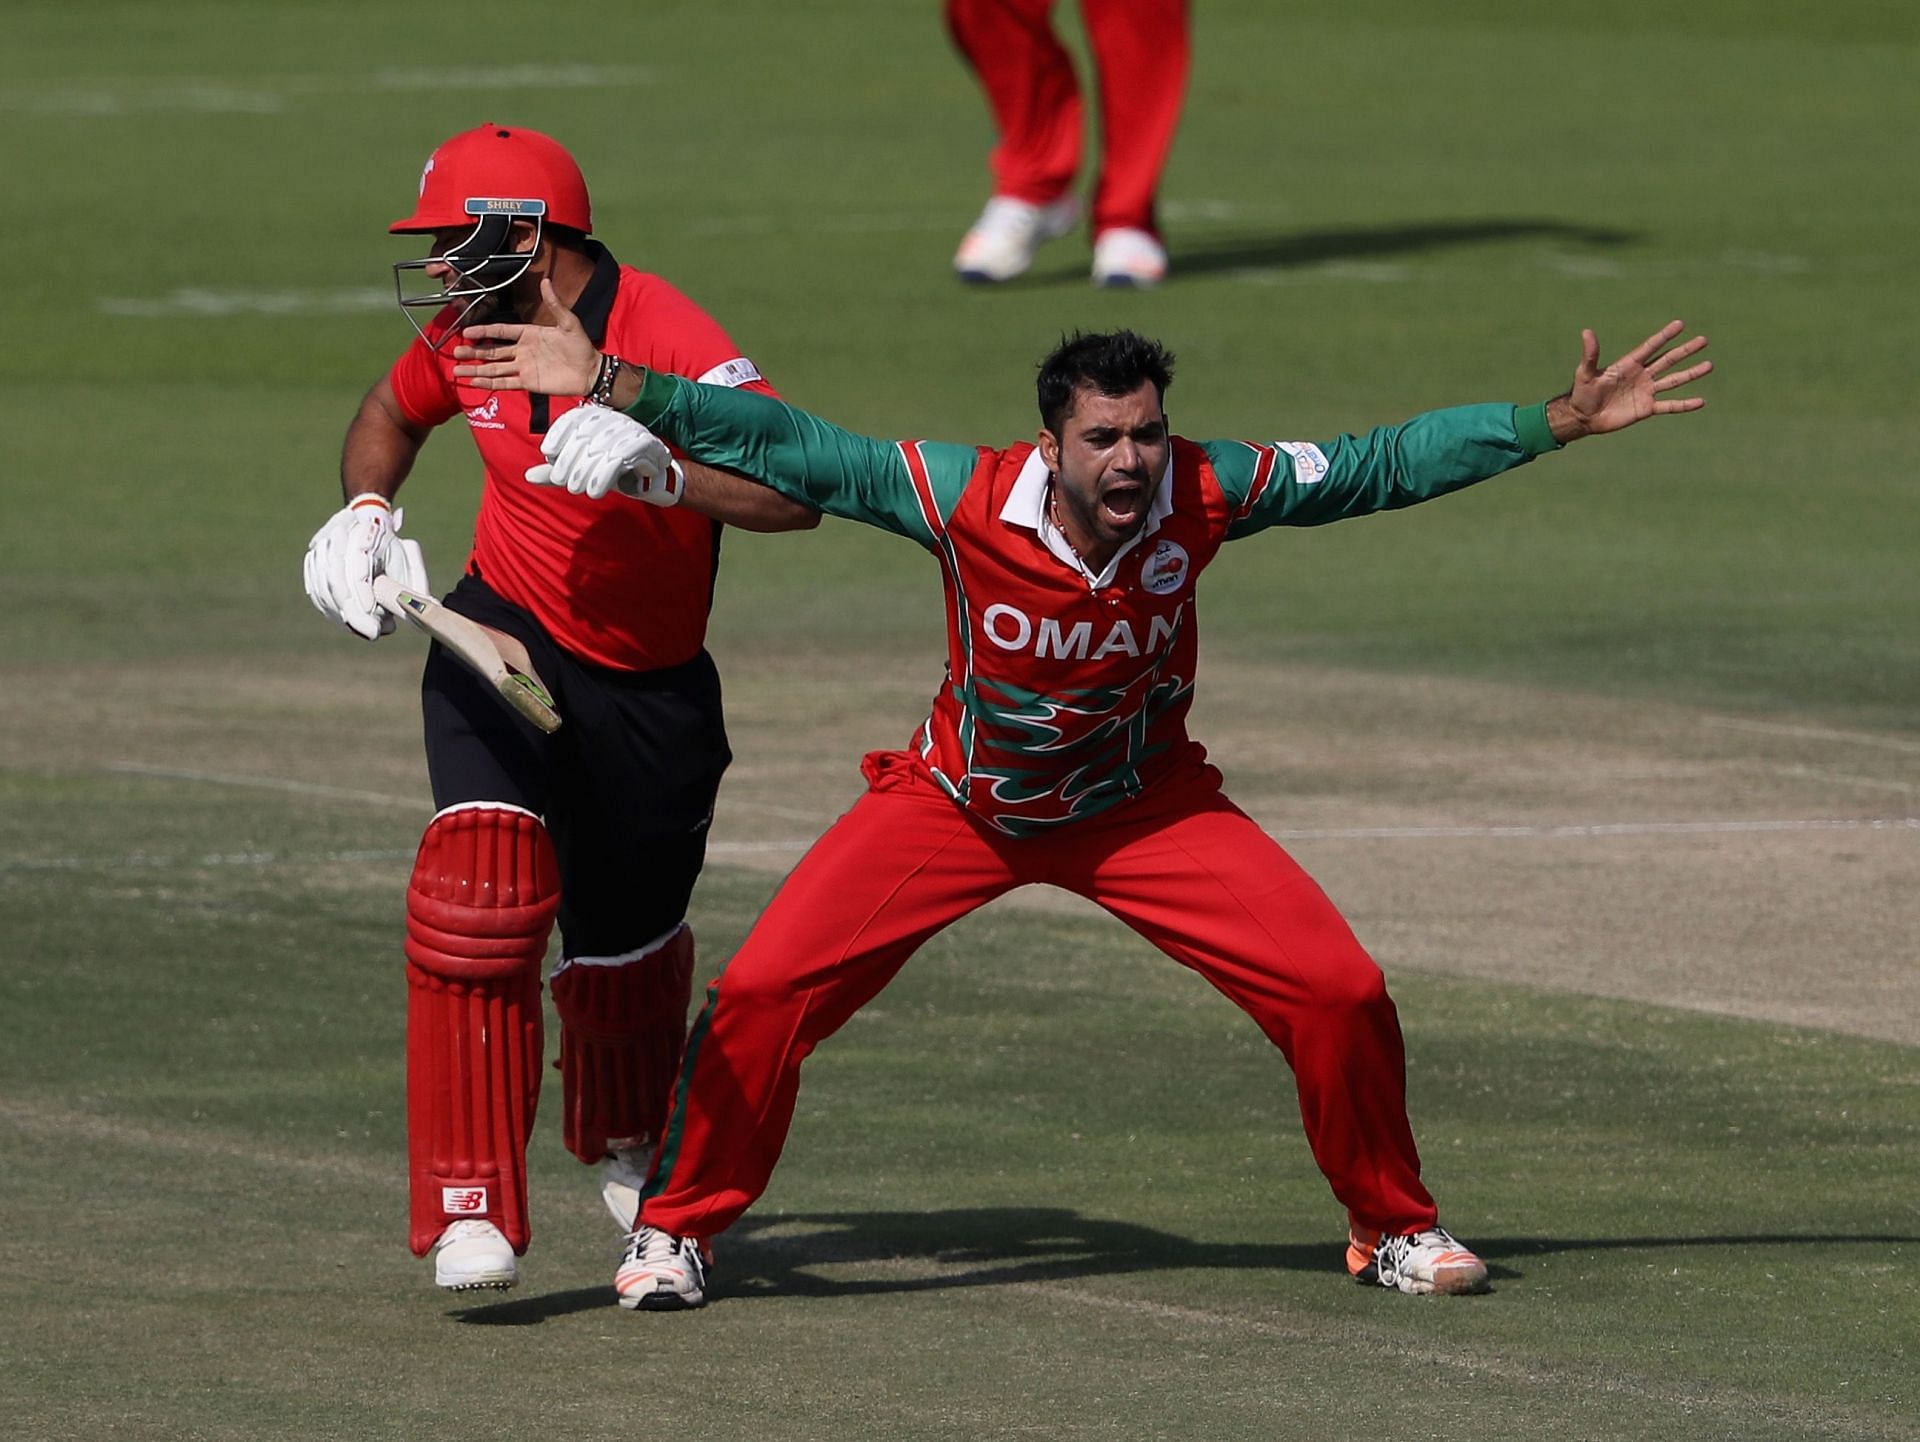 Babar Hayat of Hong Kong pictured during a match against Oman